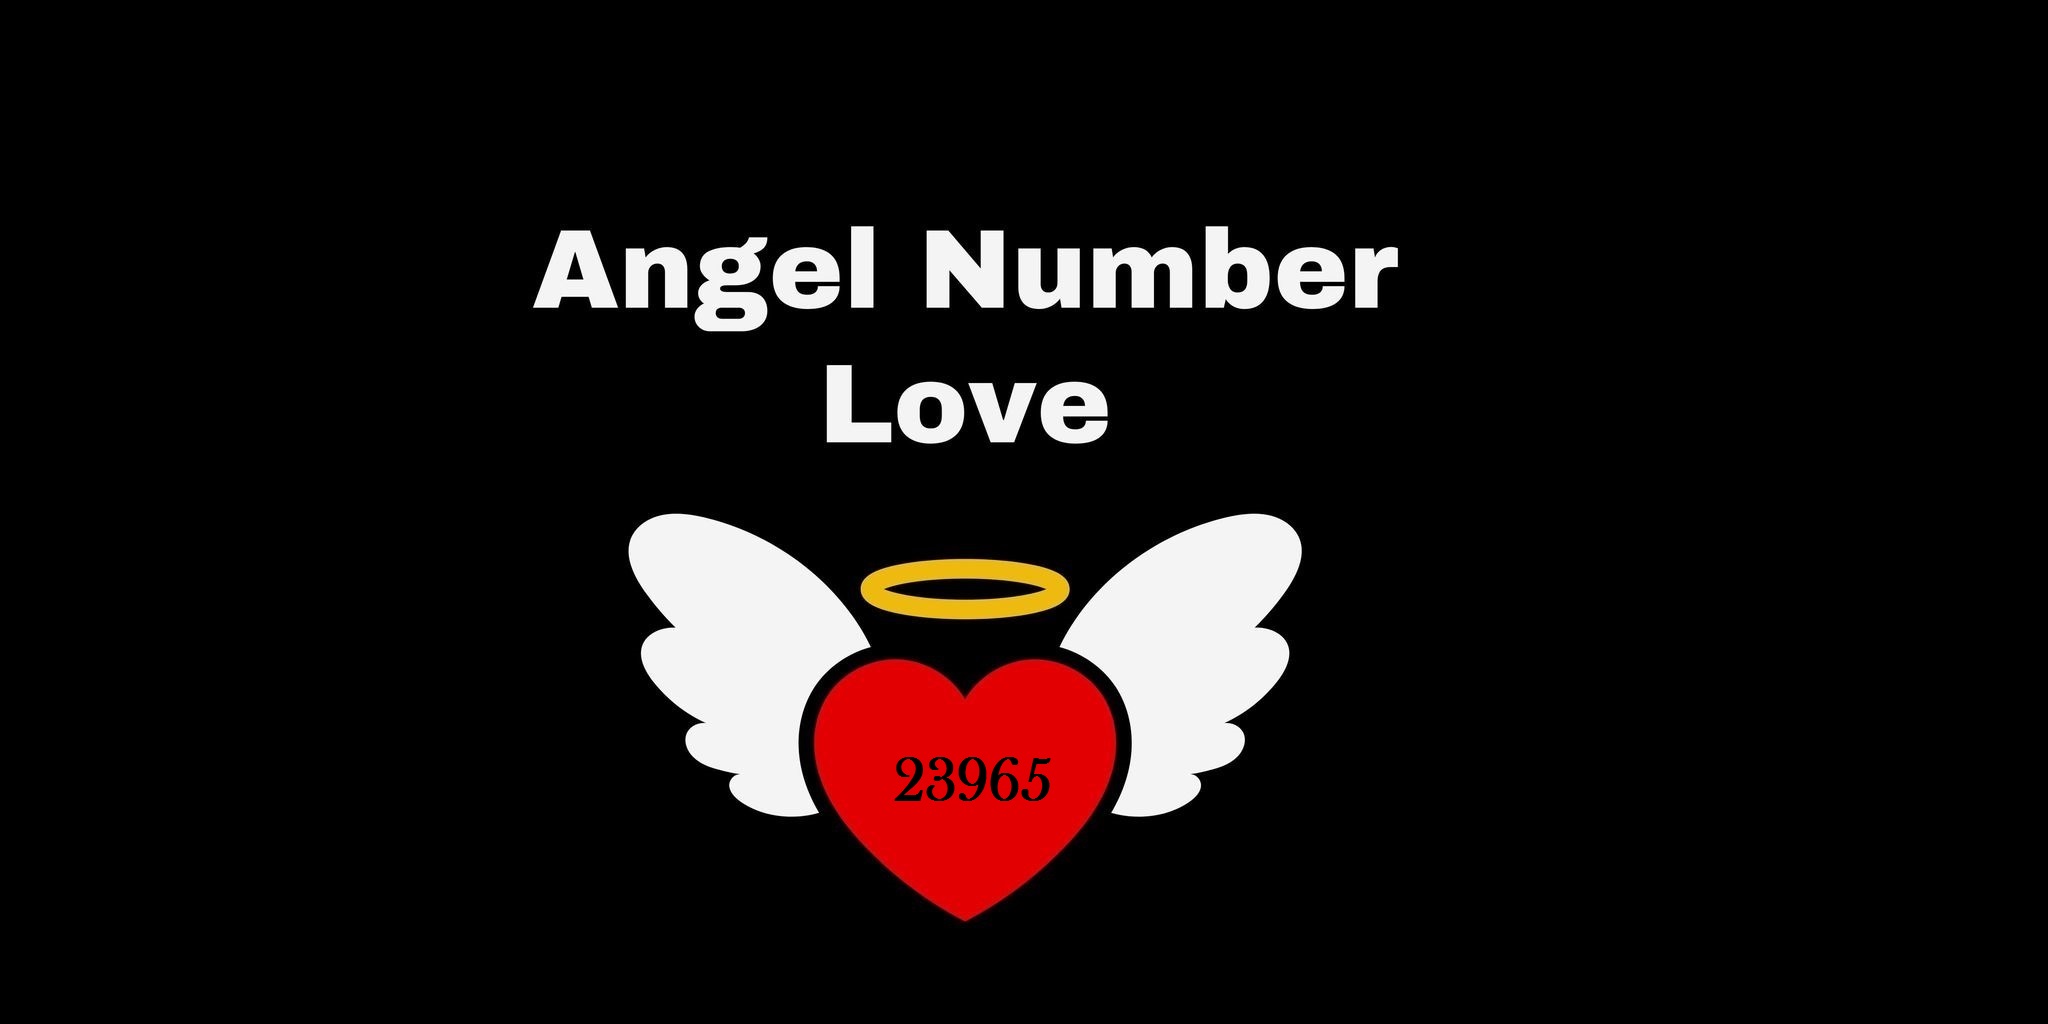 23965 Angel Number Meaning In Love